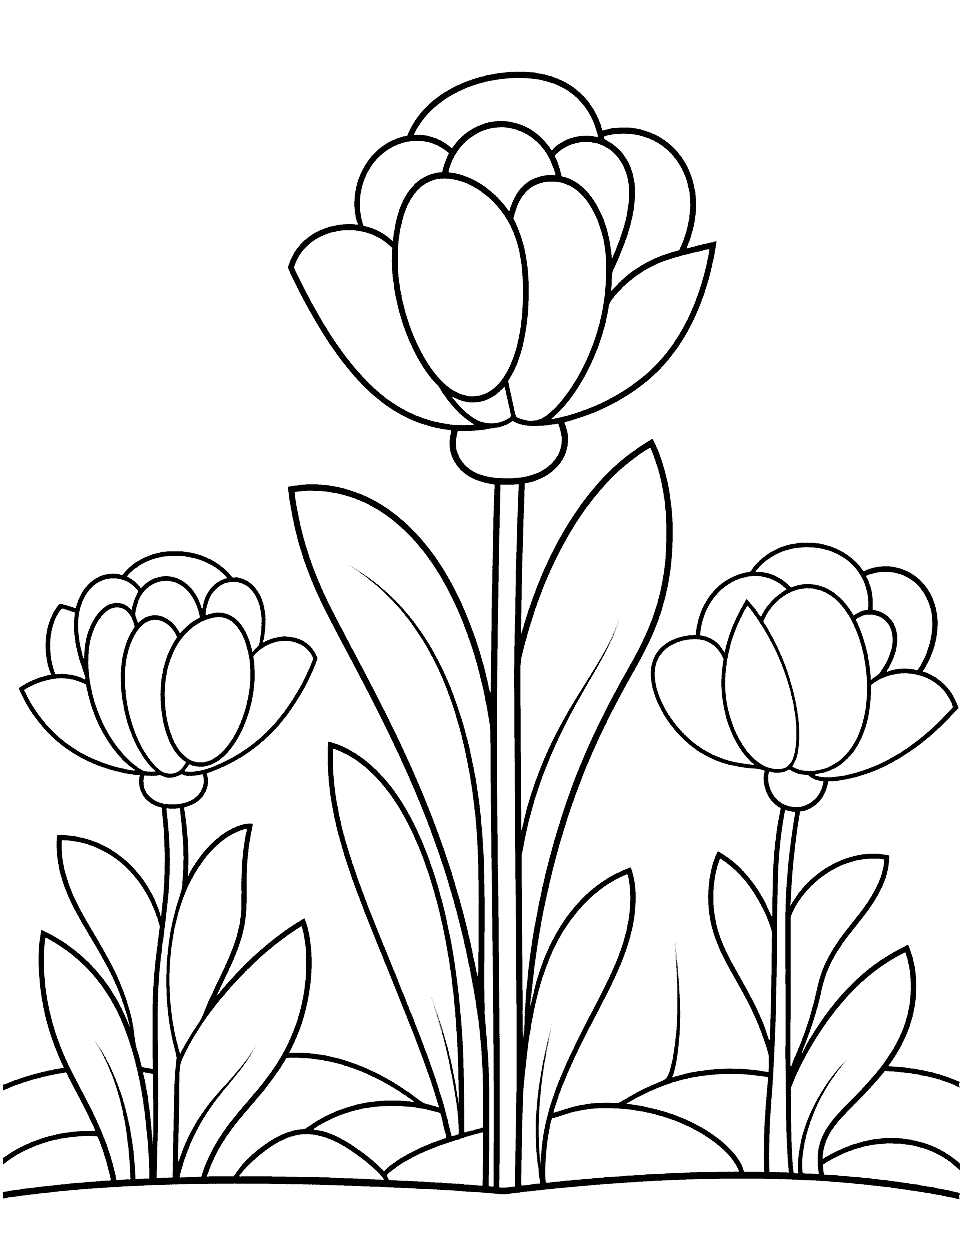 Easy Tulip Field Flower Coloring Page - A large, easy-to-color design featuring a field of tulips.